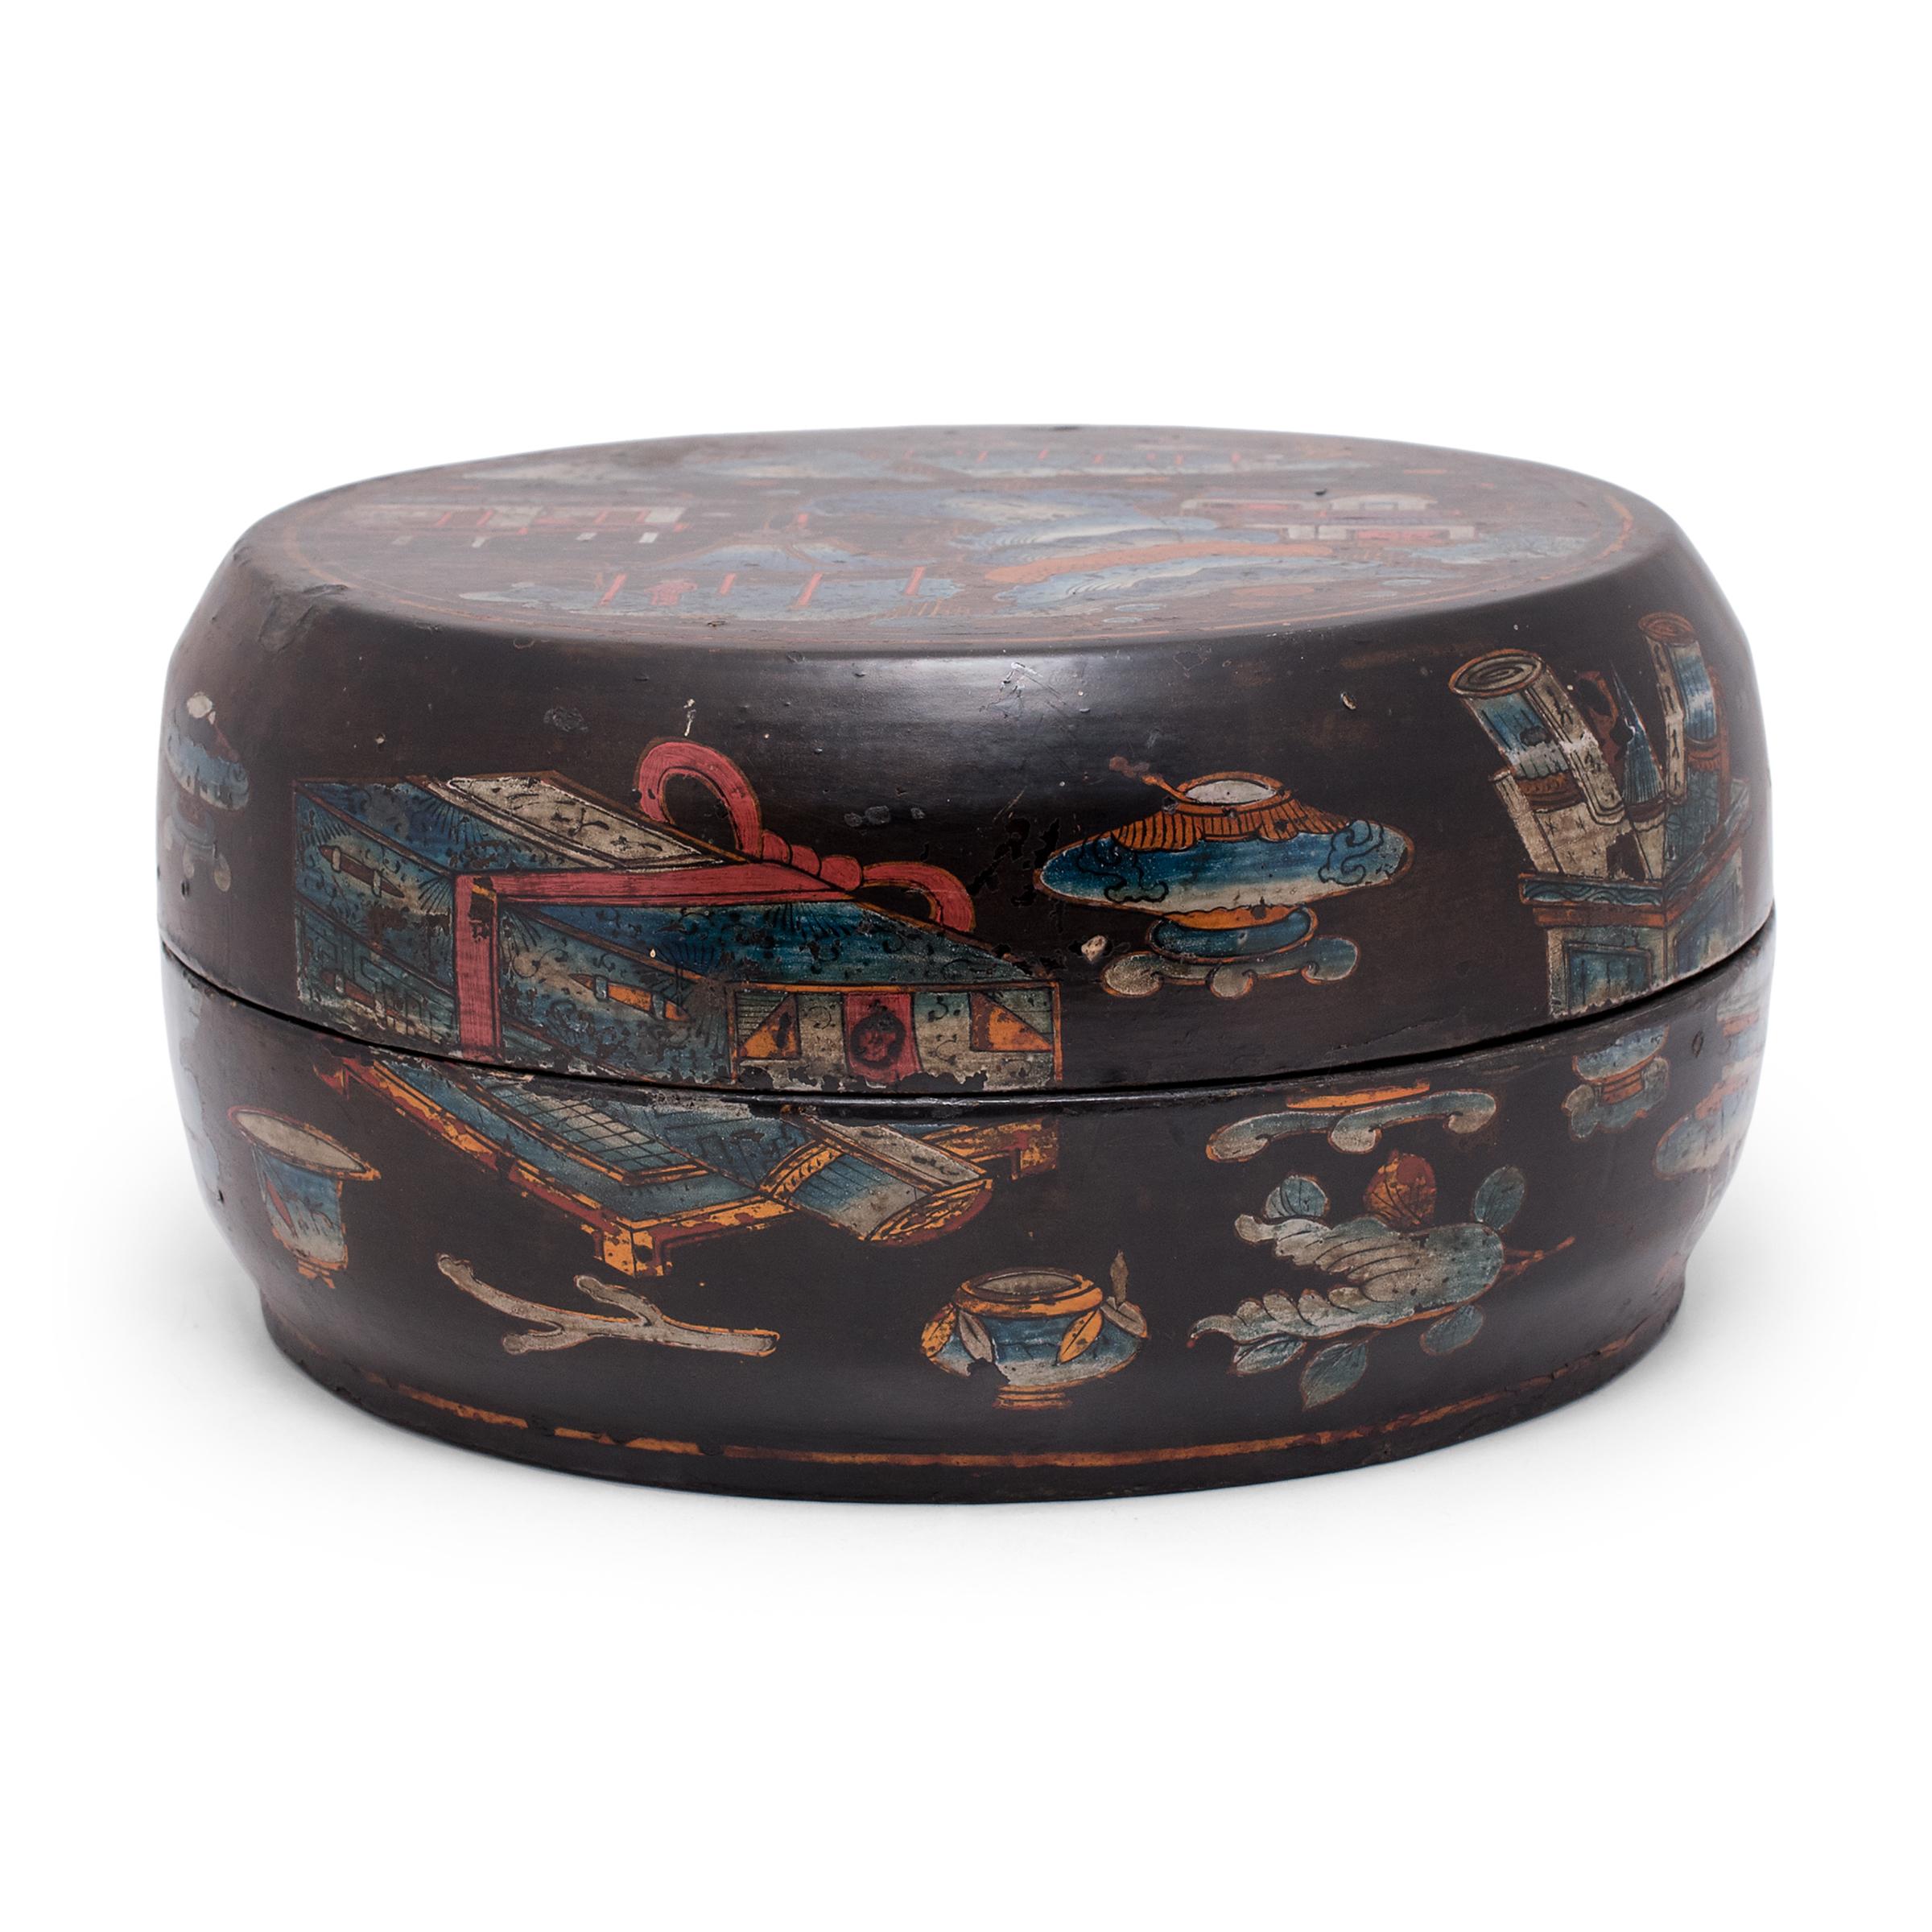 This round lacquered box dates to the mid-19th century and would have been presented to another as a gift, filled with foods, clothes, or other ceremonial gifts. Remarkably, the two halves of this box are not a match and were likely combined from